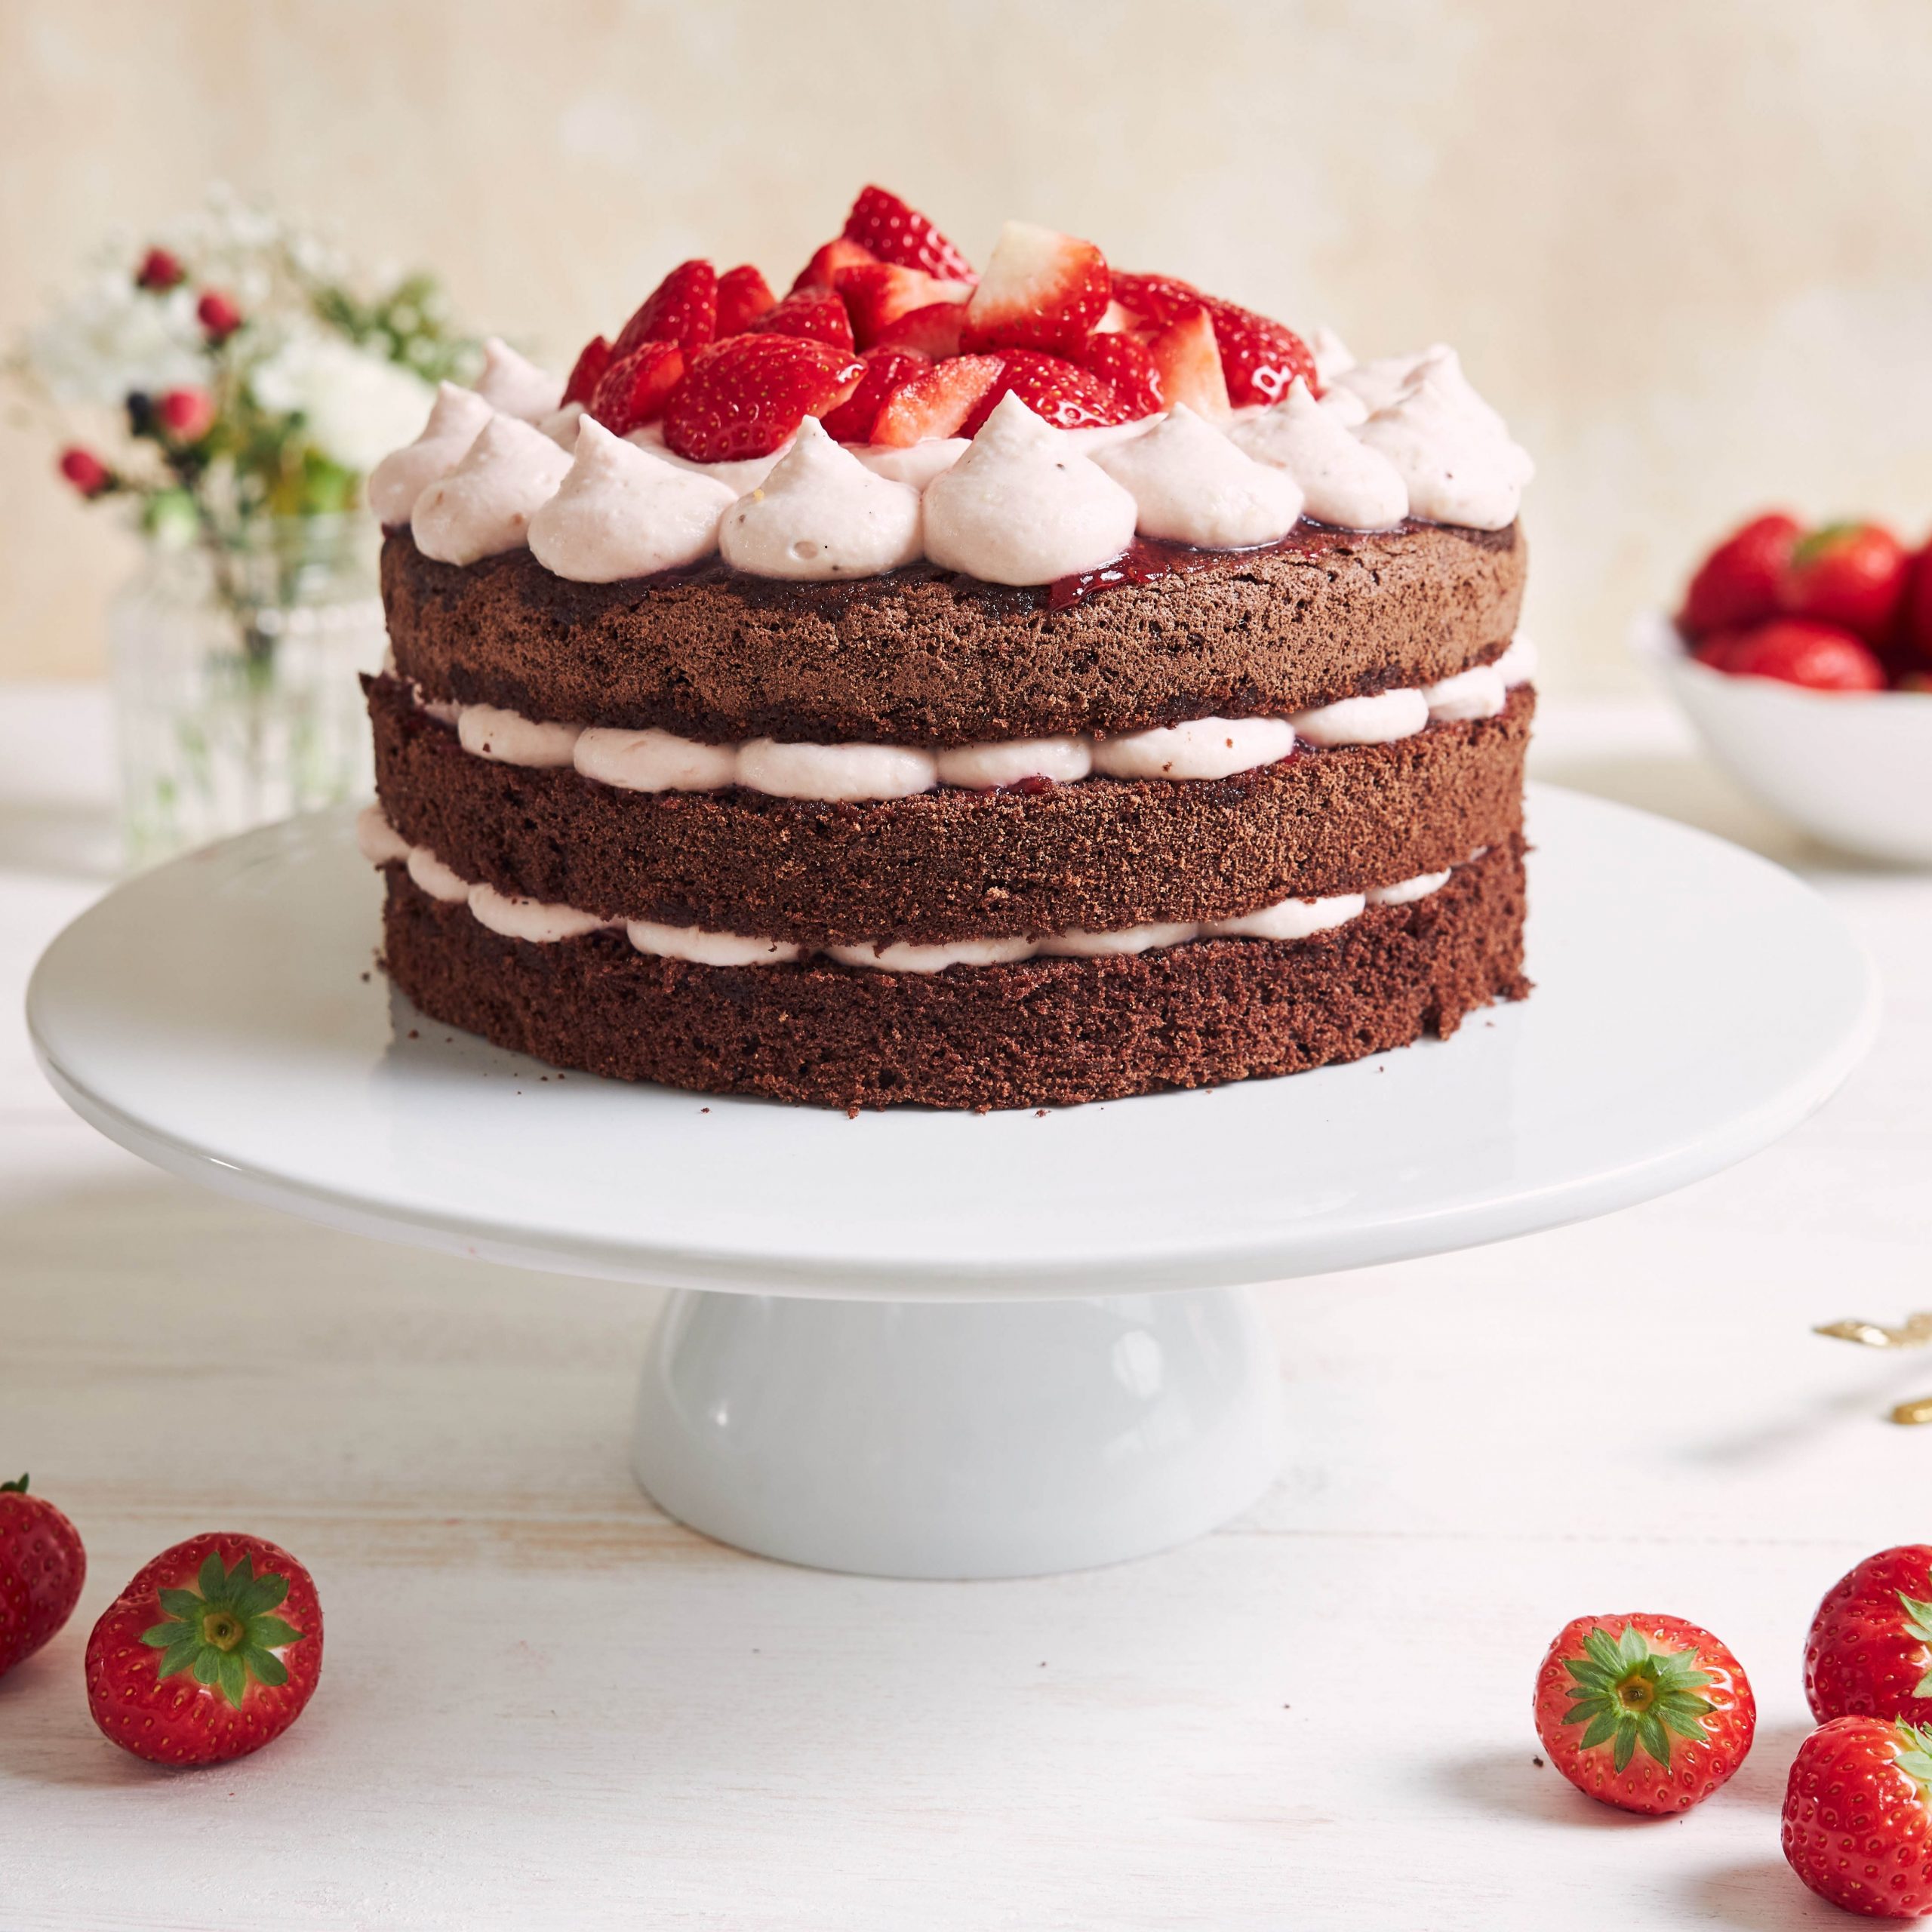 The delicious and sweet cake with strawberries and baiser on a plate